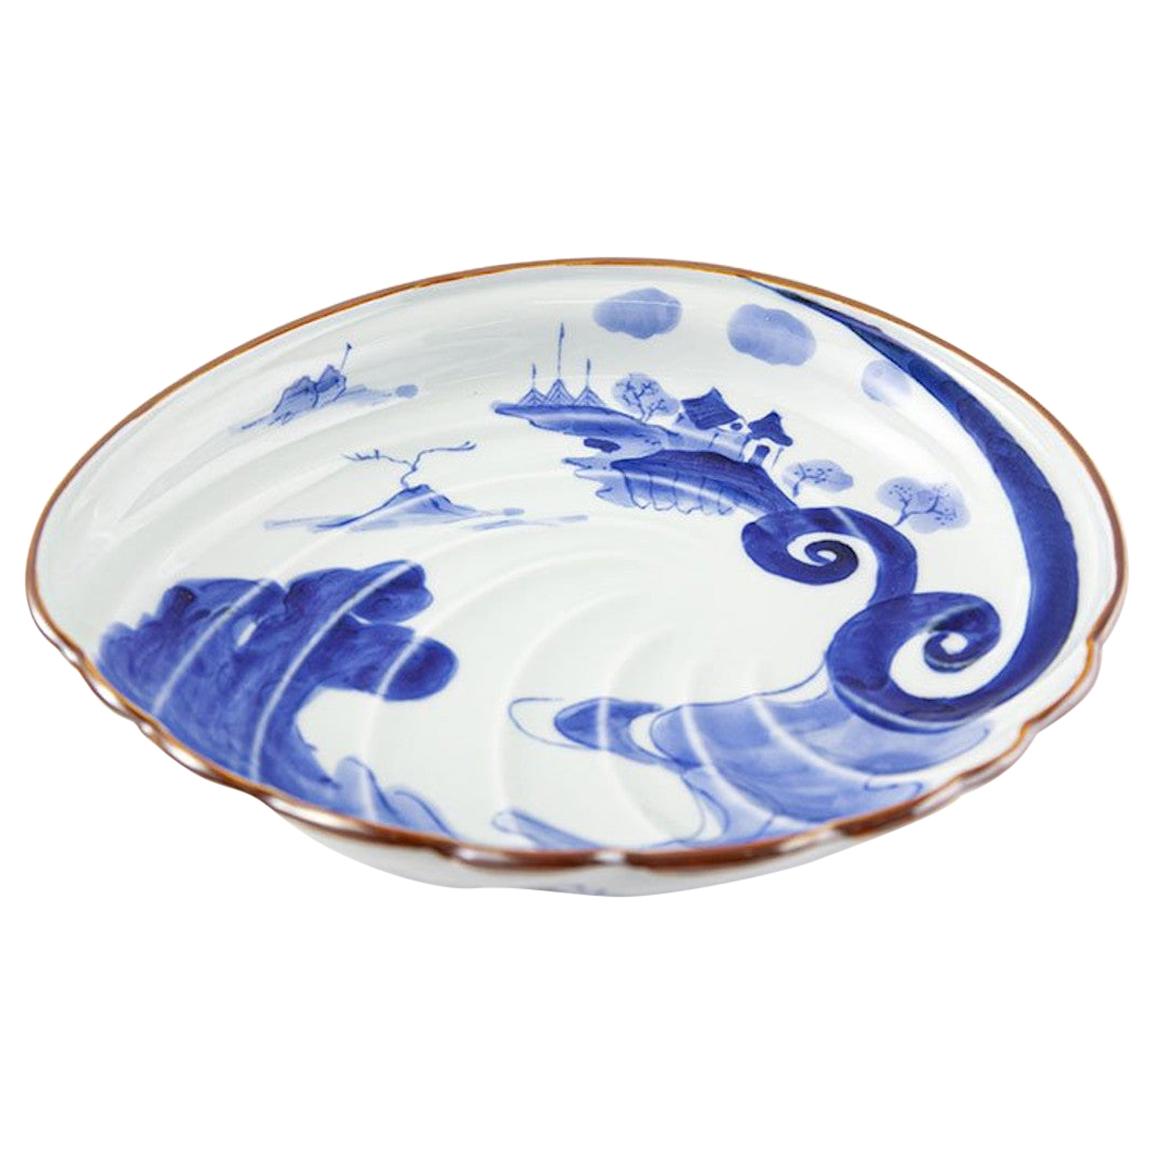 Japanese Contemporary Blue White Porcelain Charger 